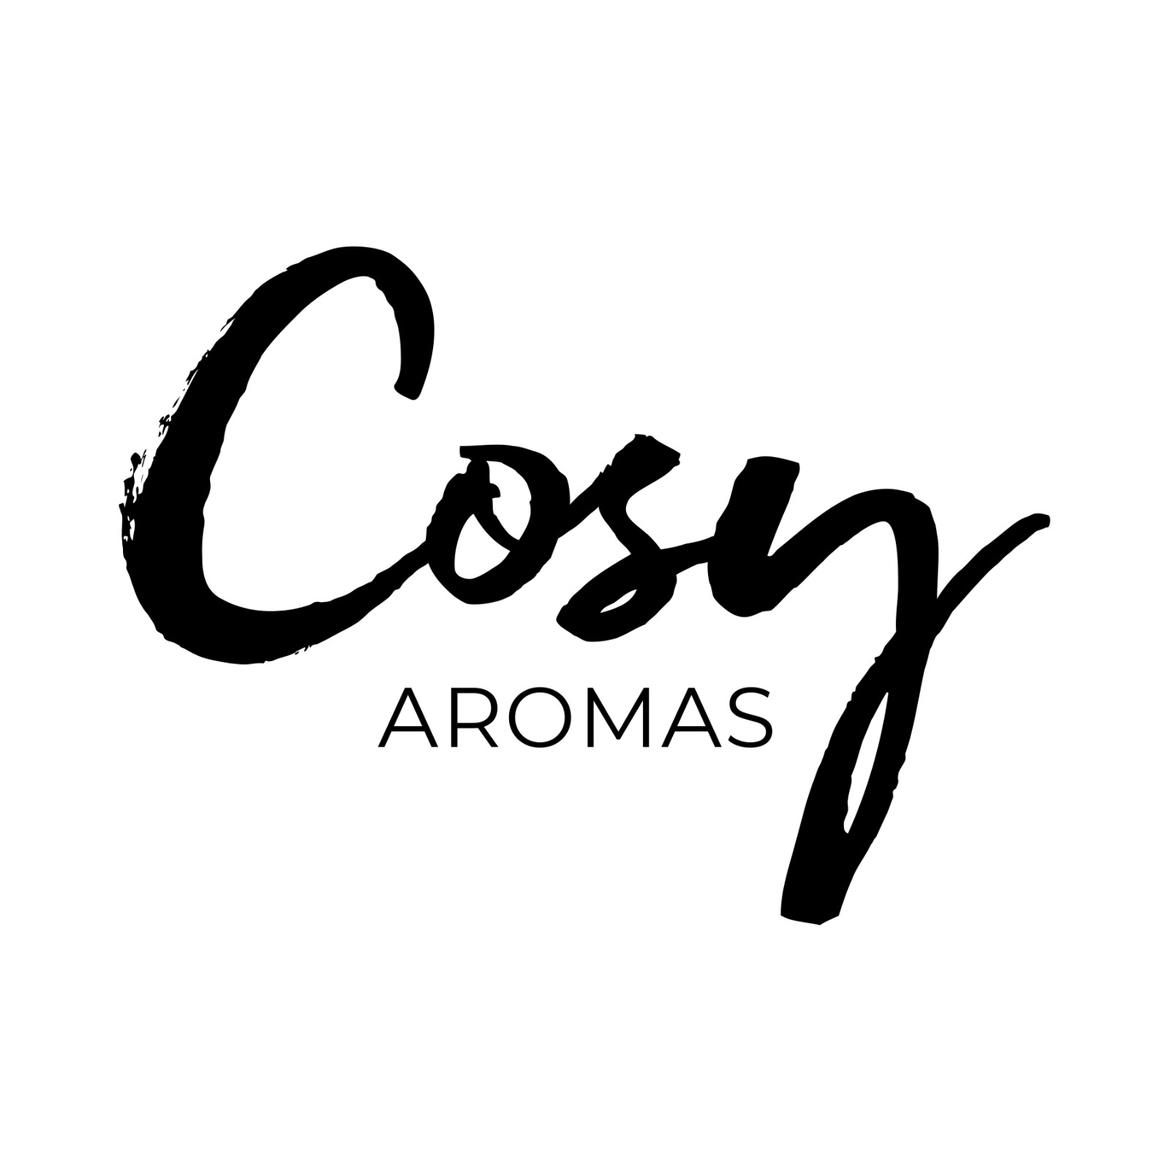 CosyAromas's images